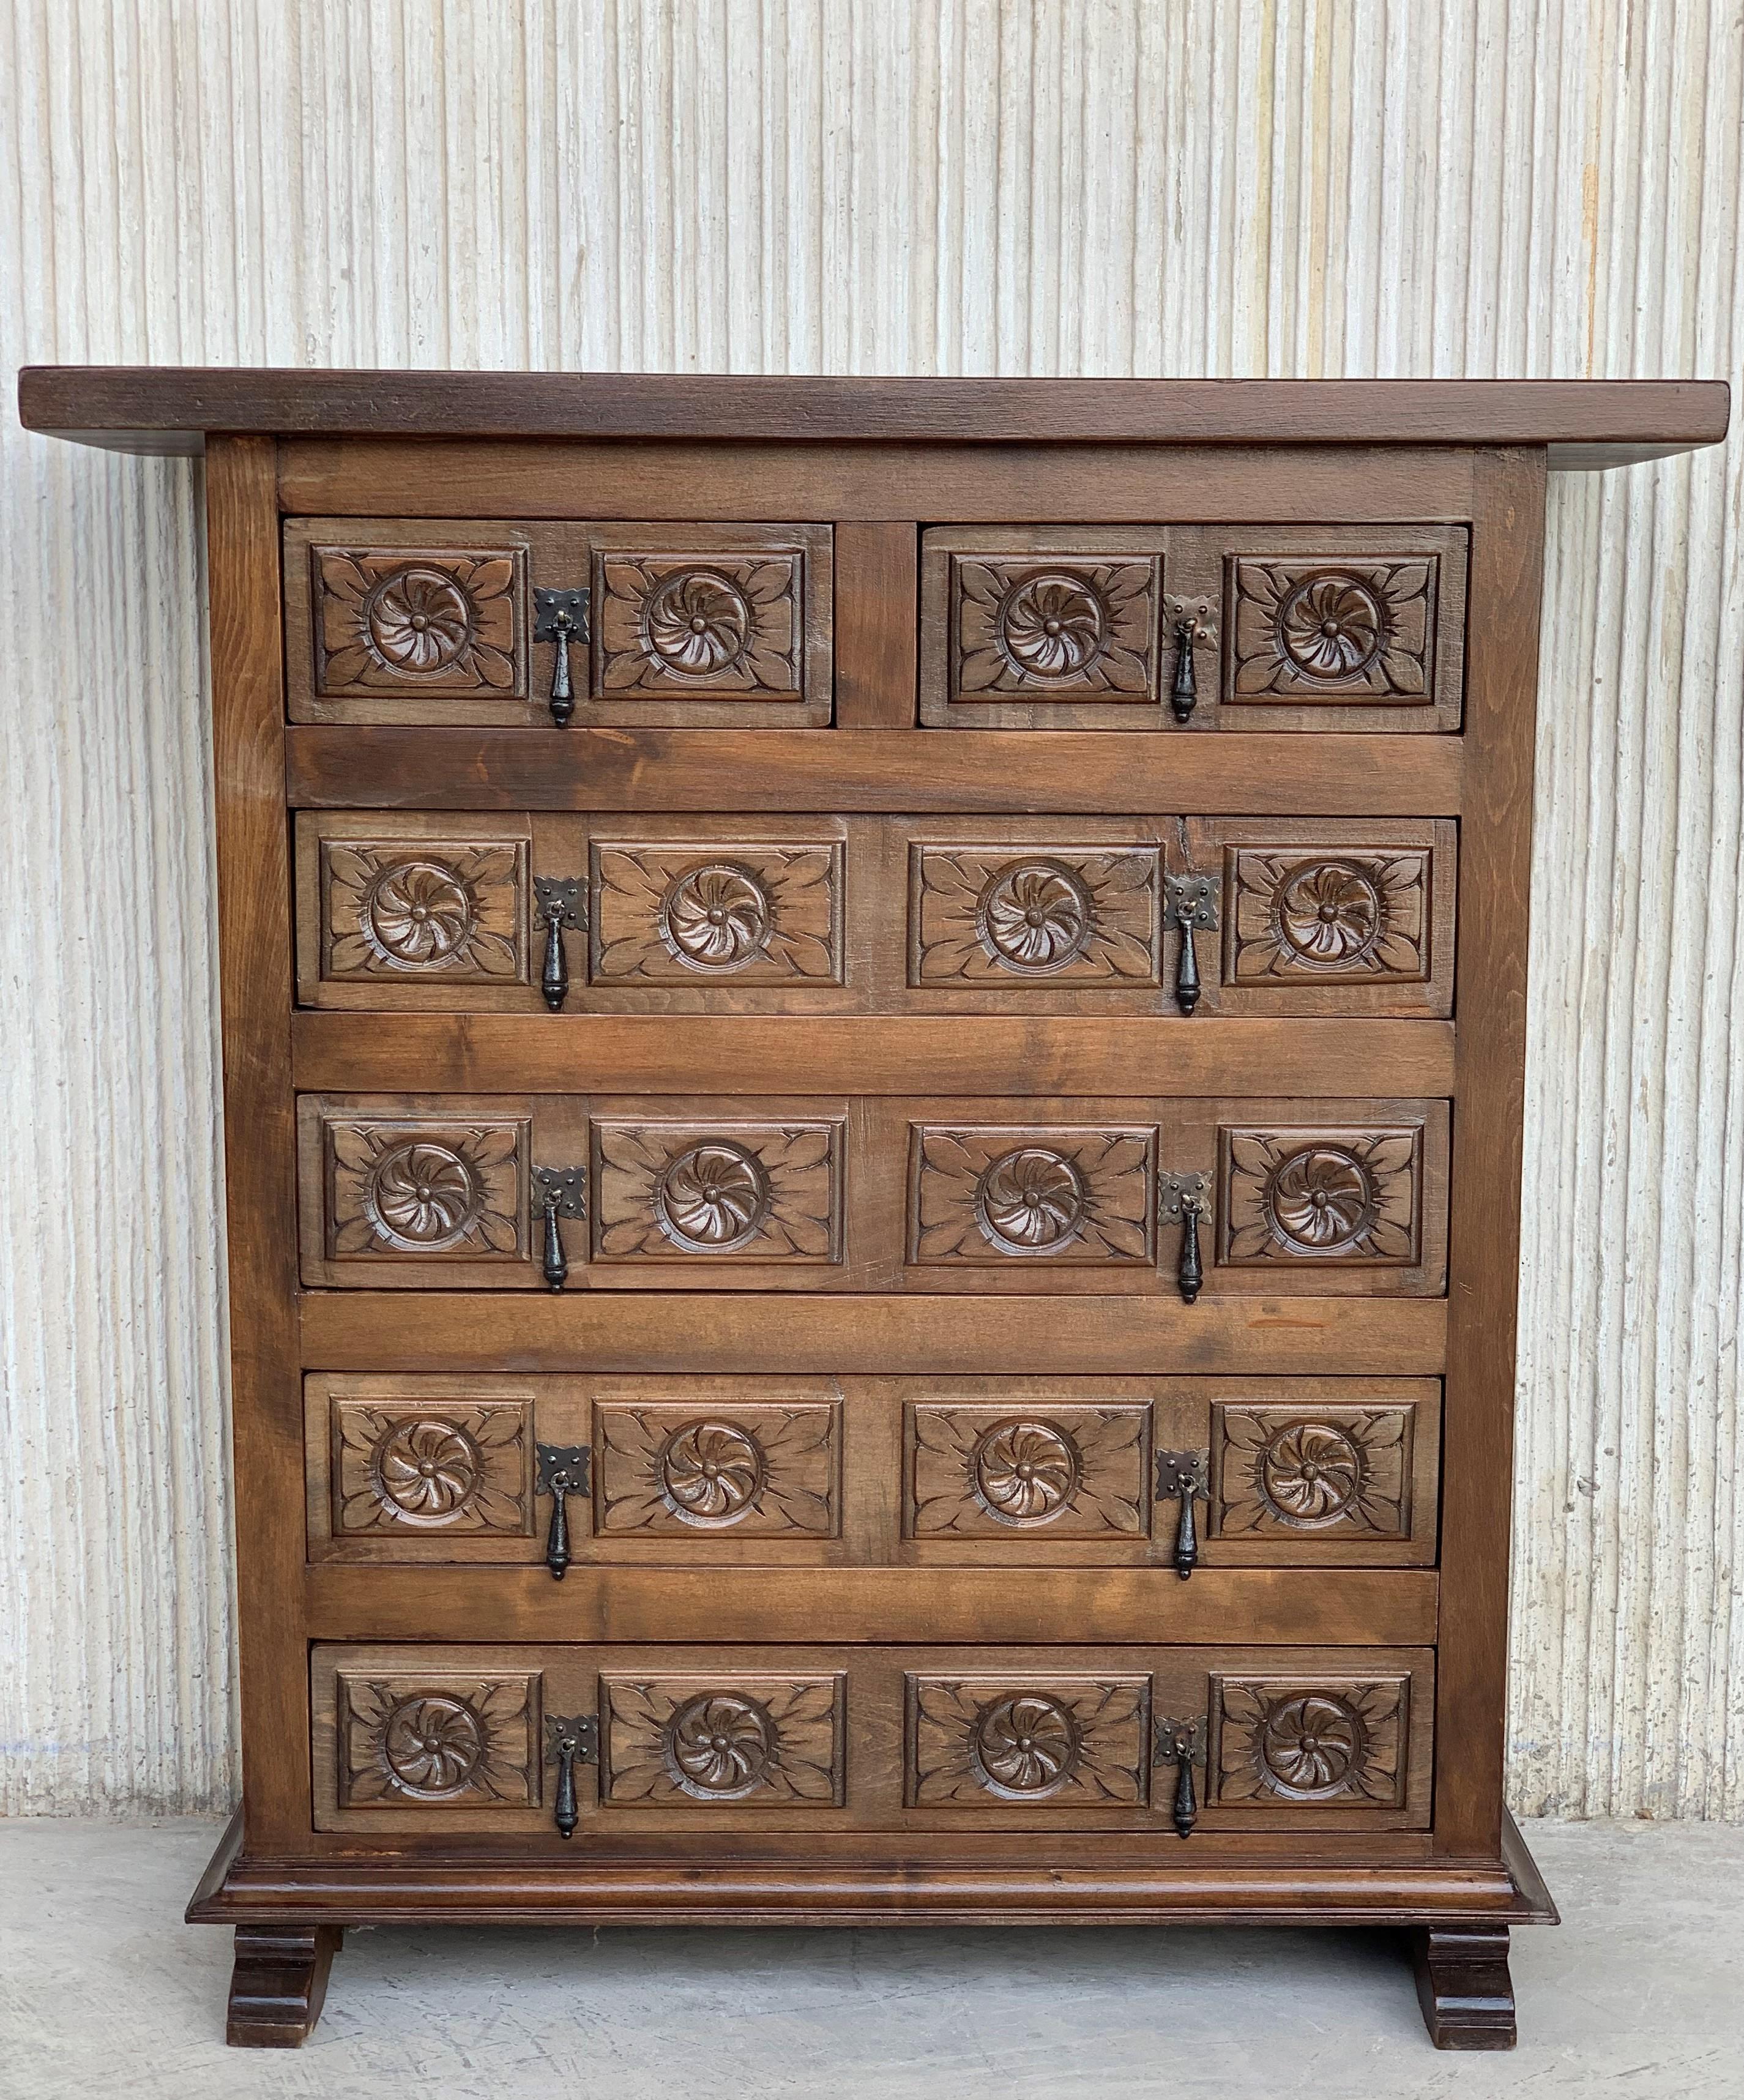 19th Century 19th Catalan Spanish Carved Walnut Chest of Drawers, Highboy or Console